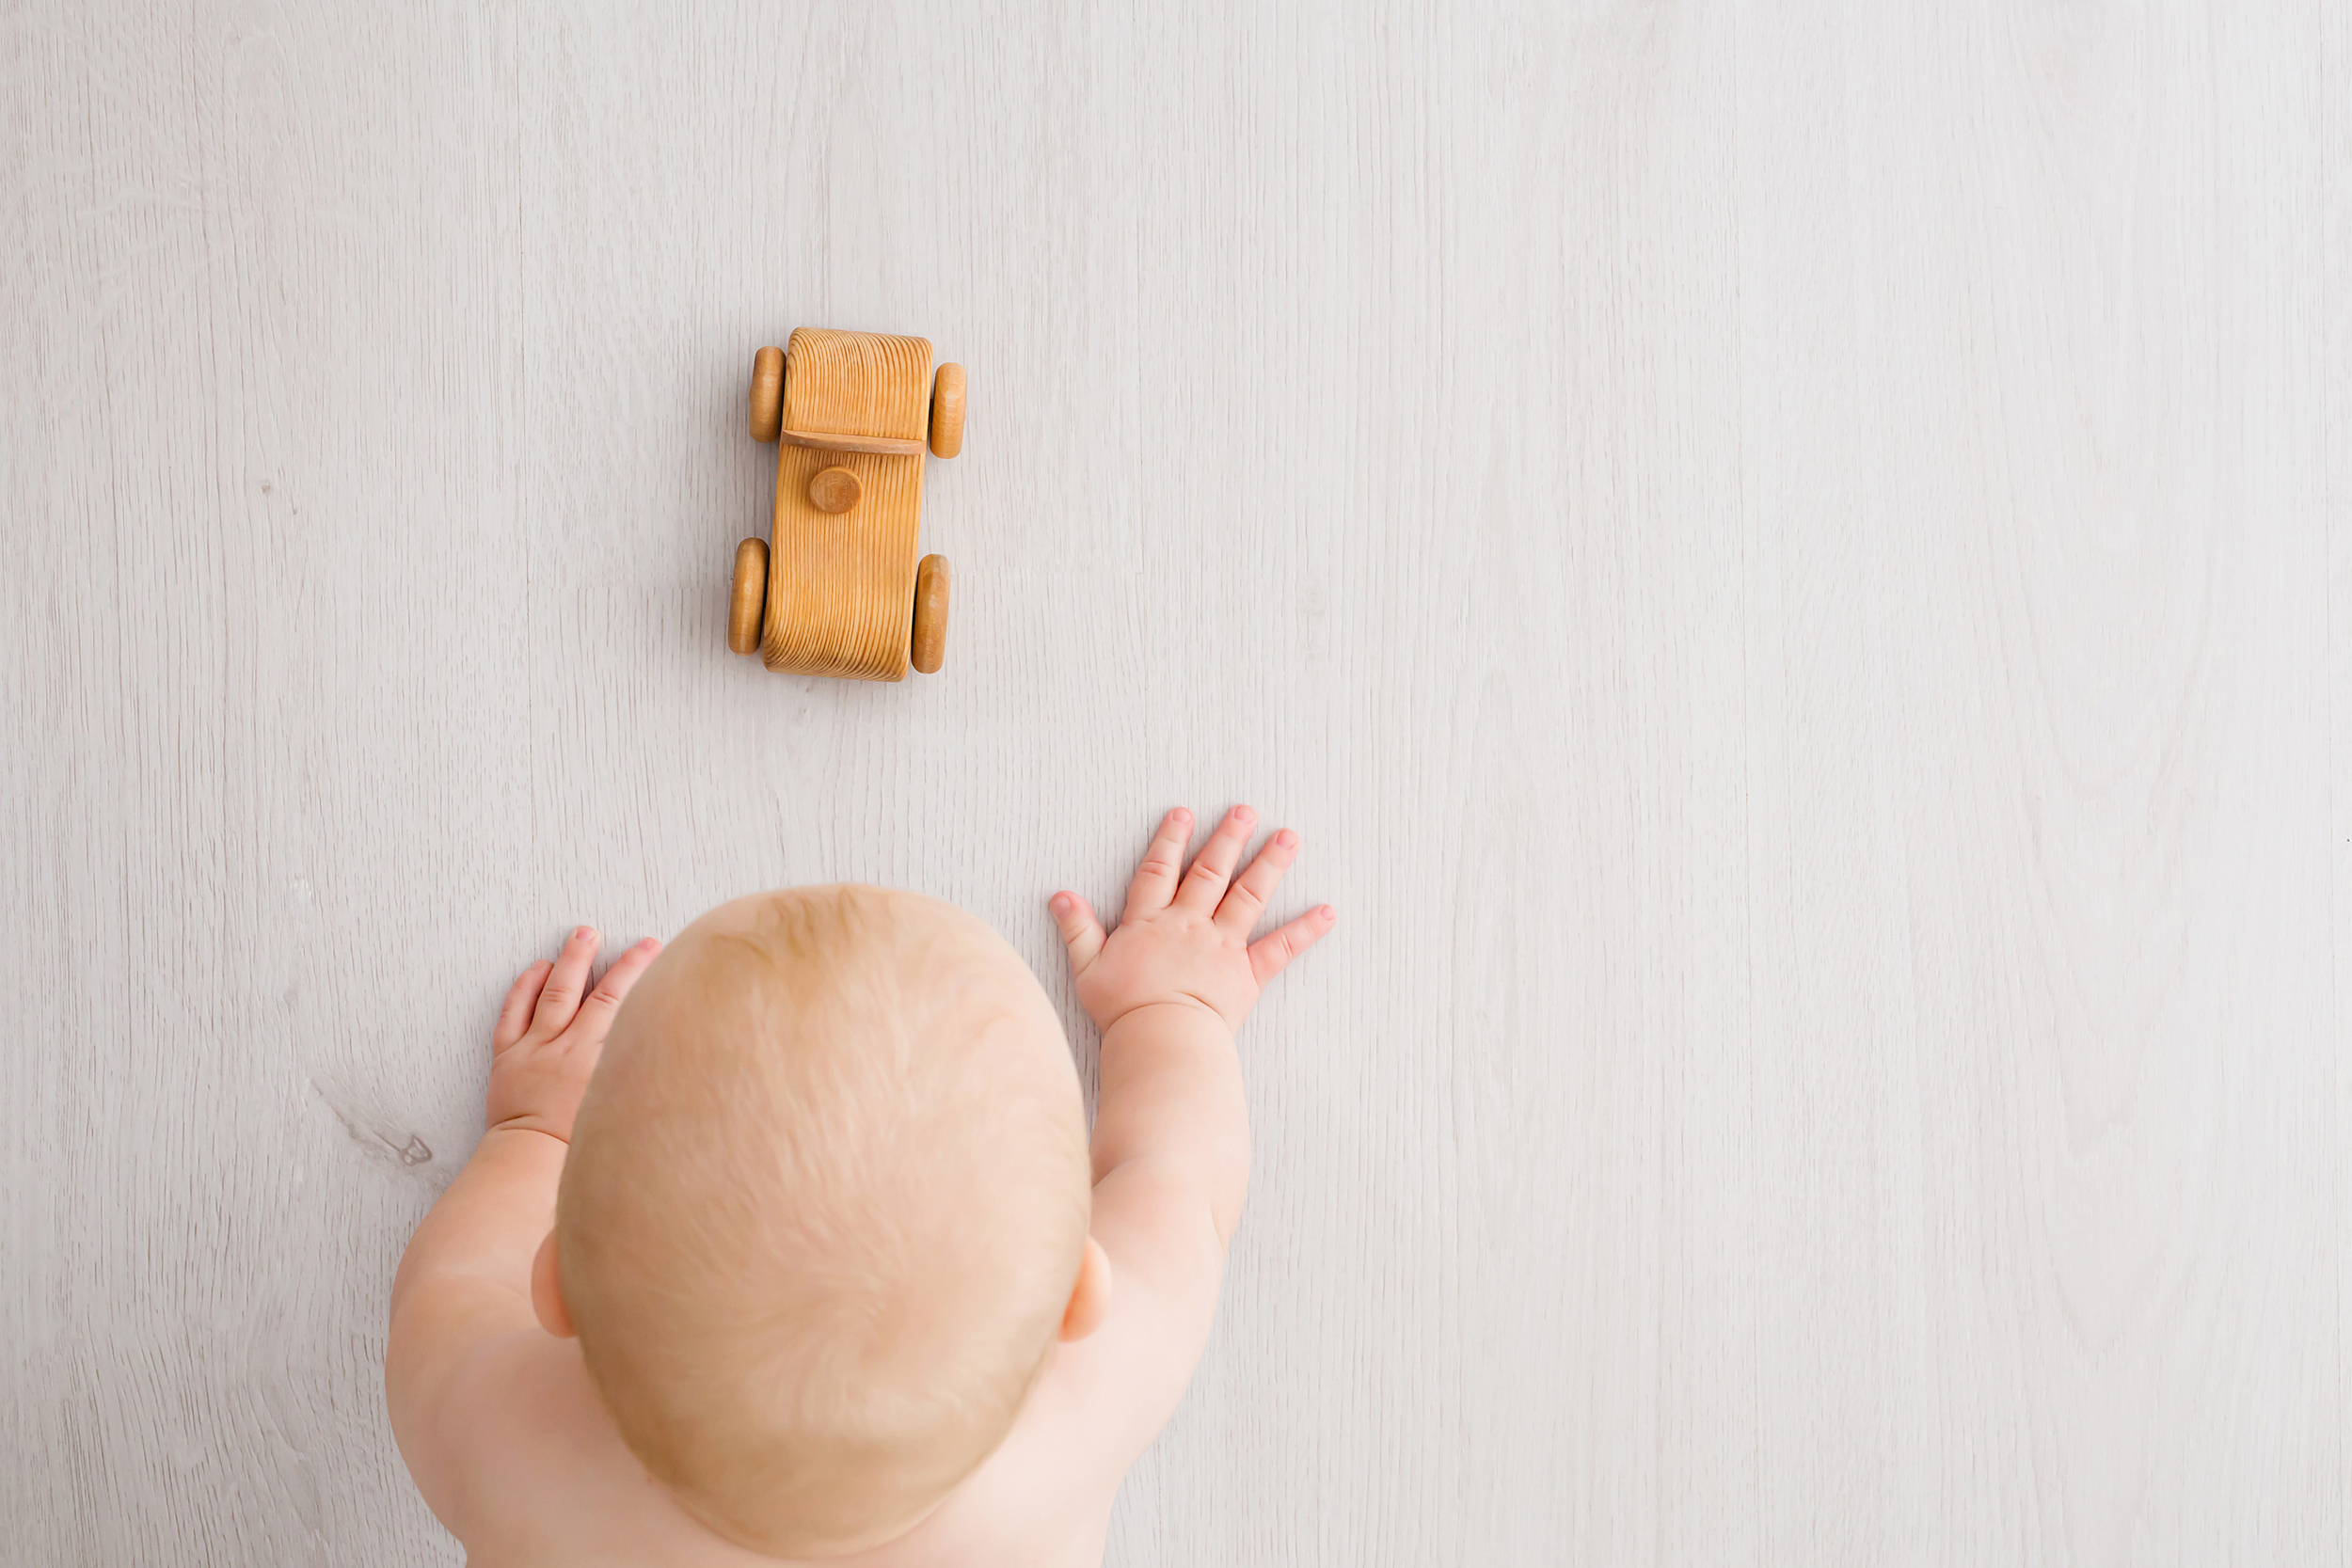 Image from above of baby crawling towards wooden car during baby milestone photography session in Melbourne